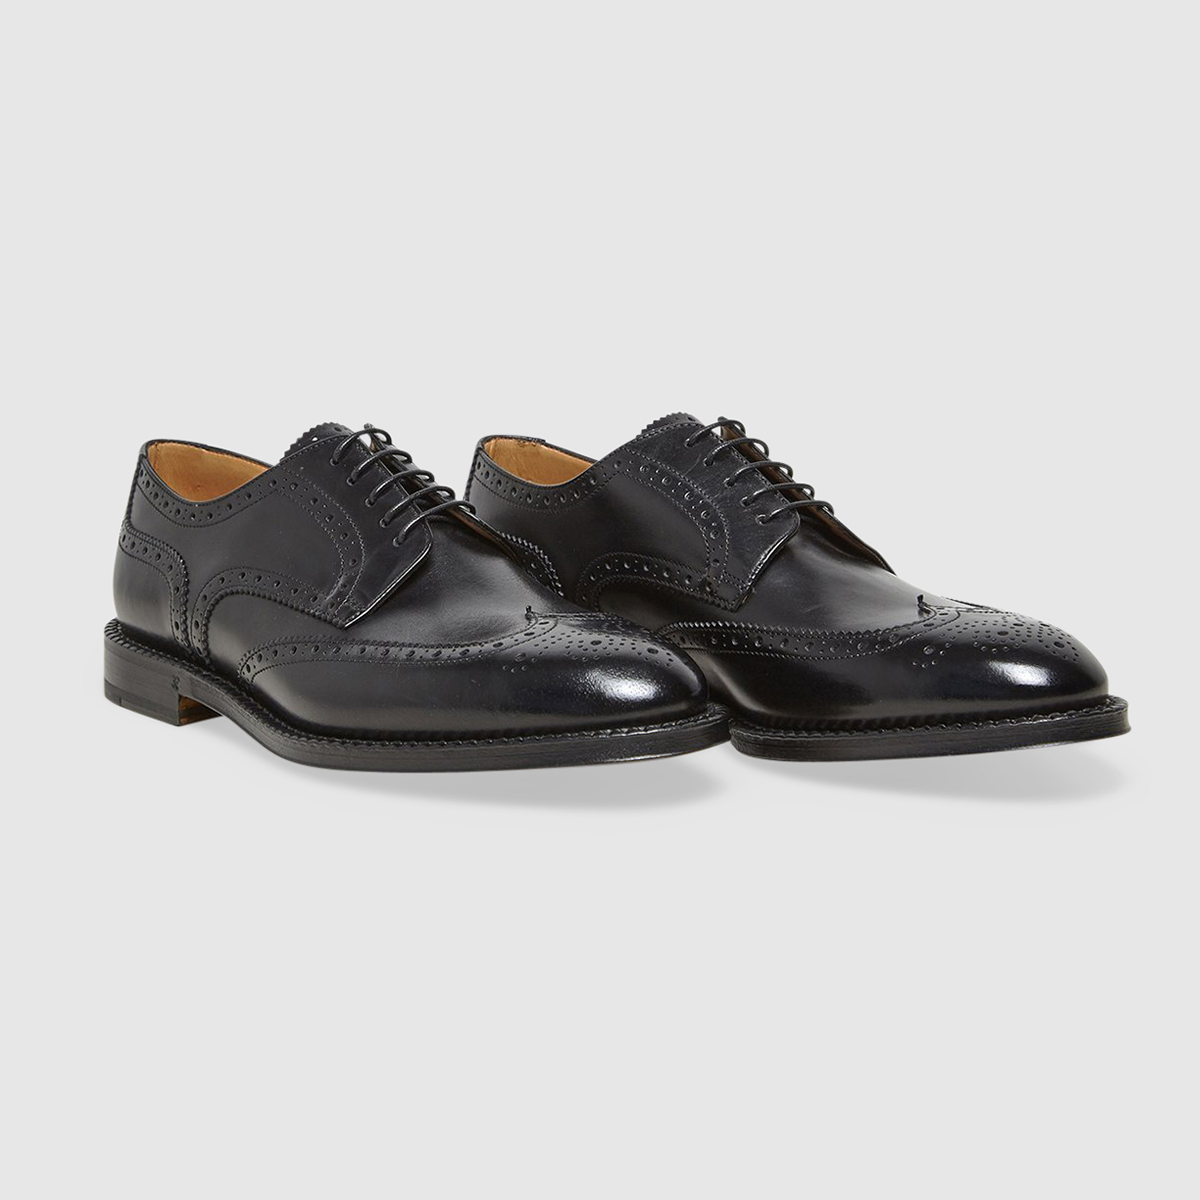 Lace-up Shoes in Black Brogue Calfskin Gruppo Fabi on sale 2022 2